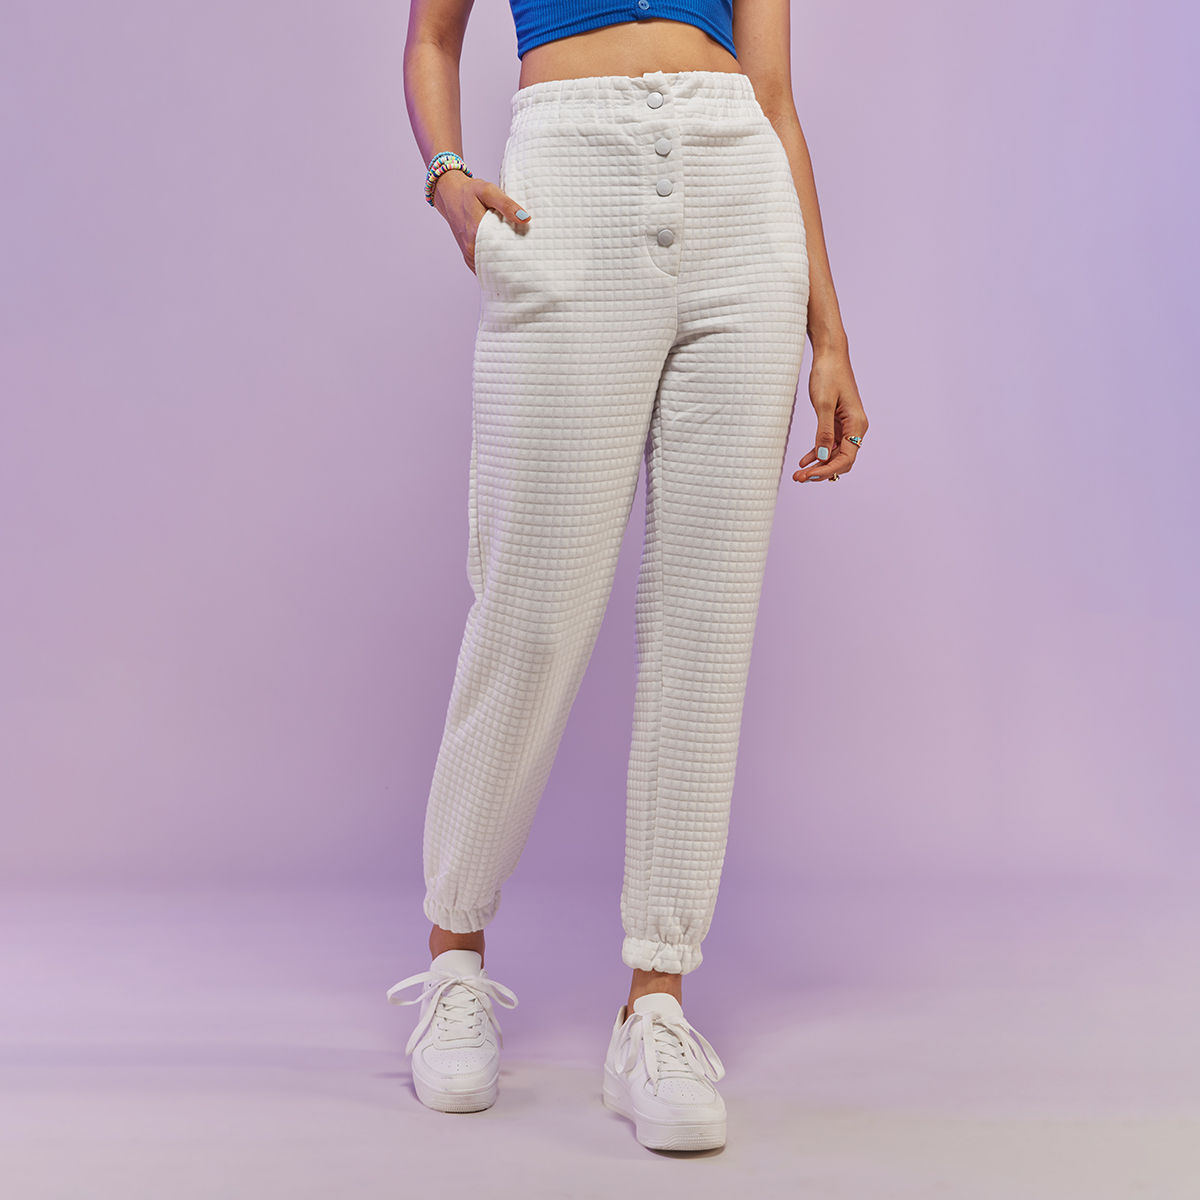 Buy MIXT by Nykaa Fashion Black Textured High Waist Joggers online